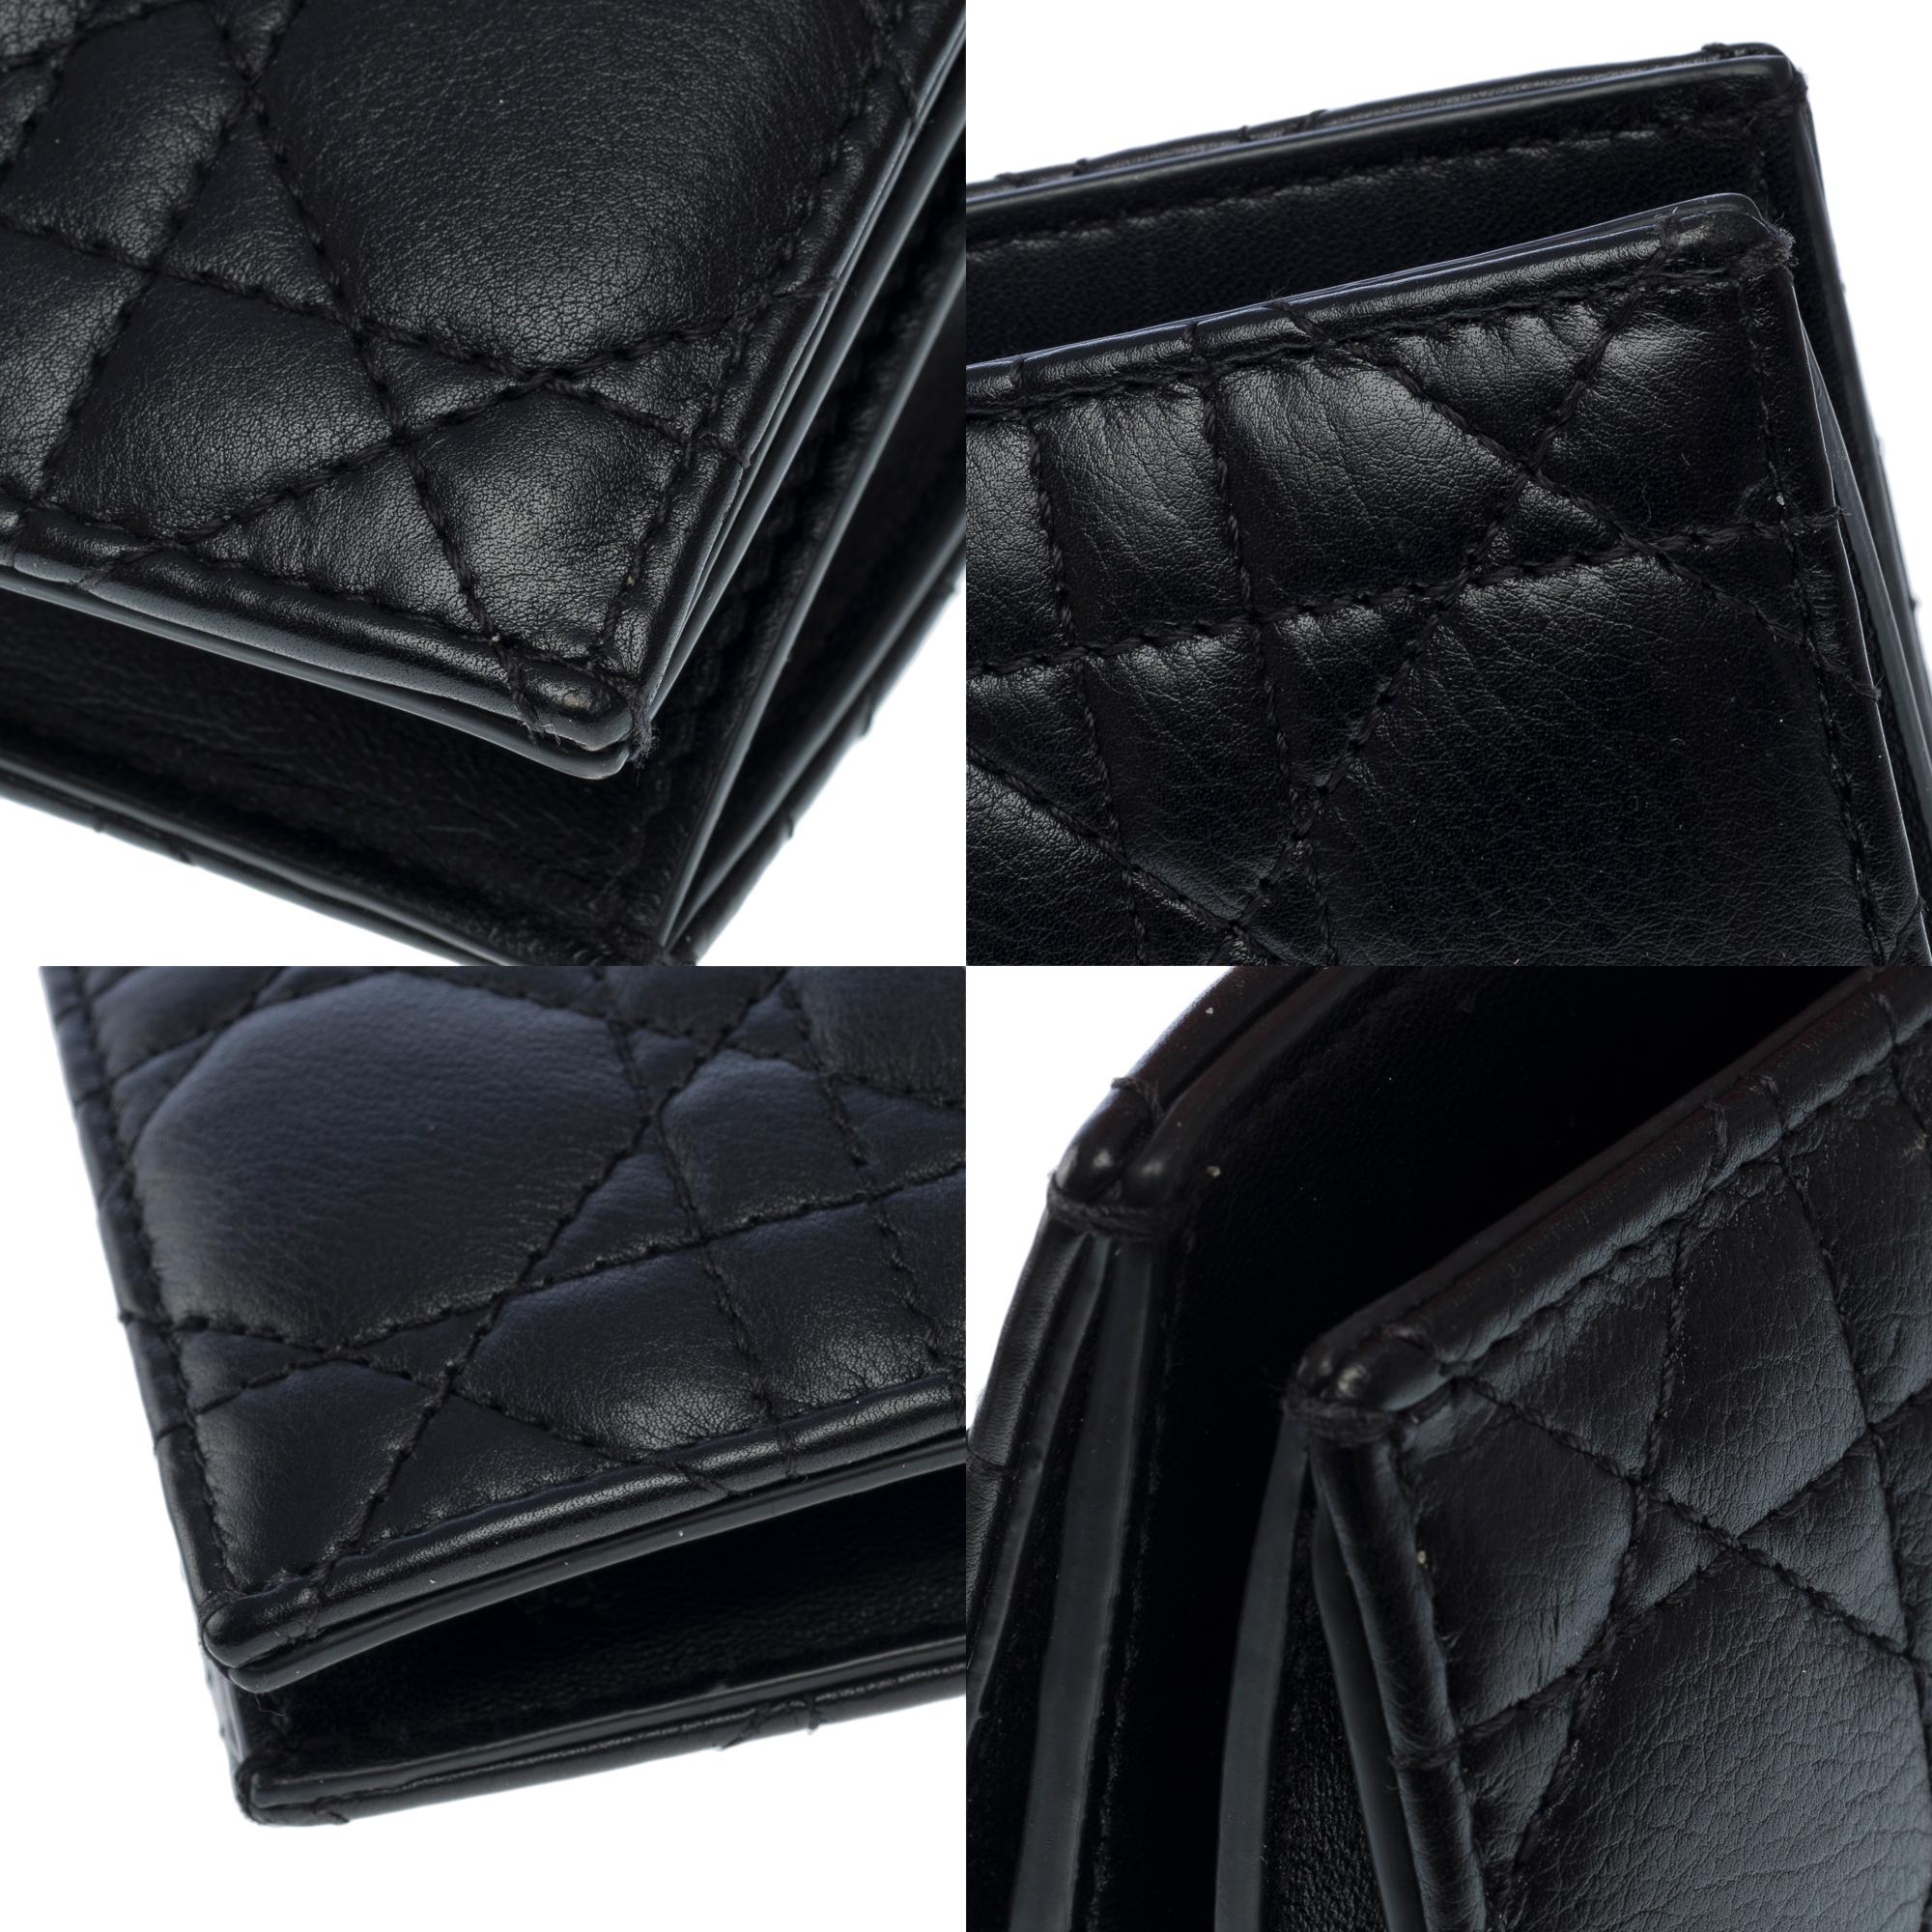 Christian Dior Caro long Wallet in black cannage leather, GHW For Sale 5